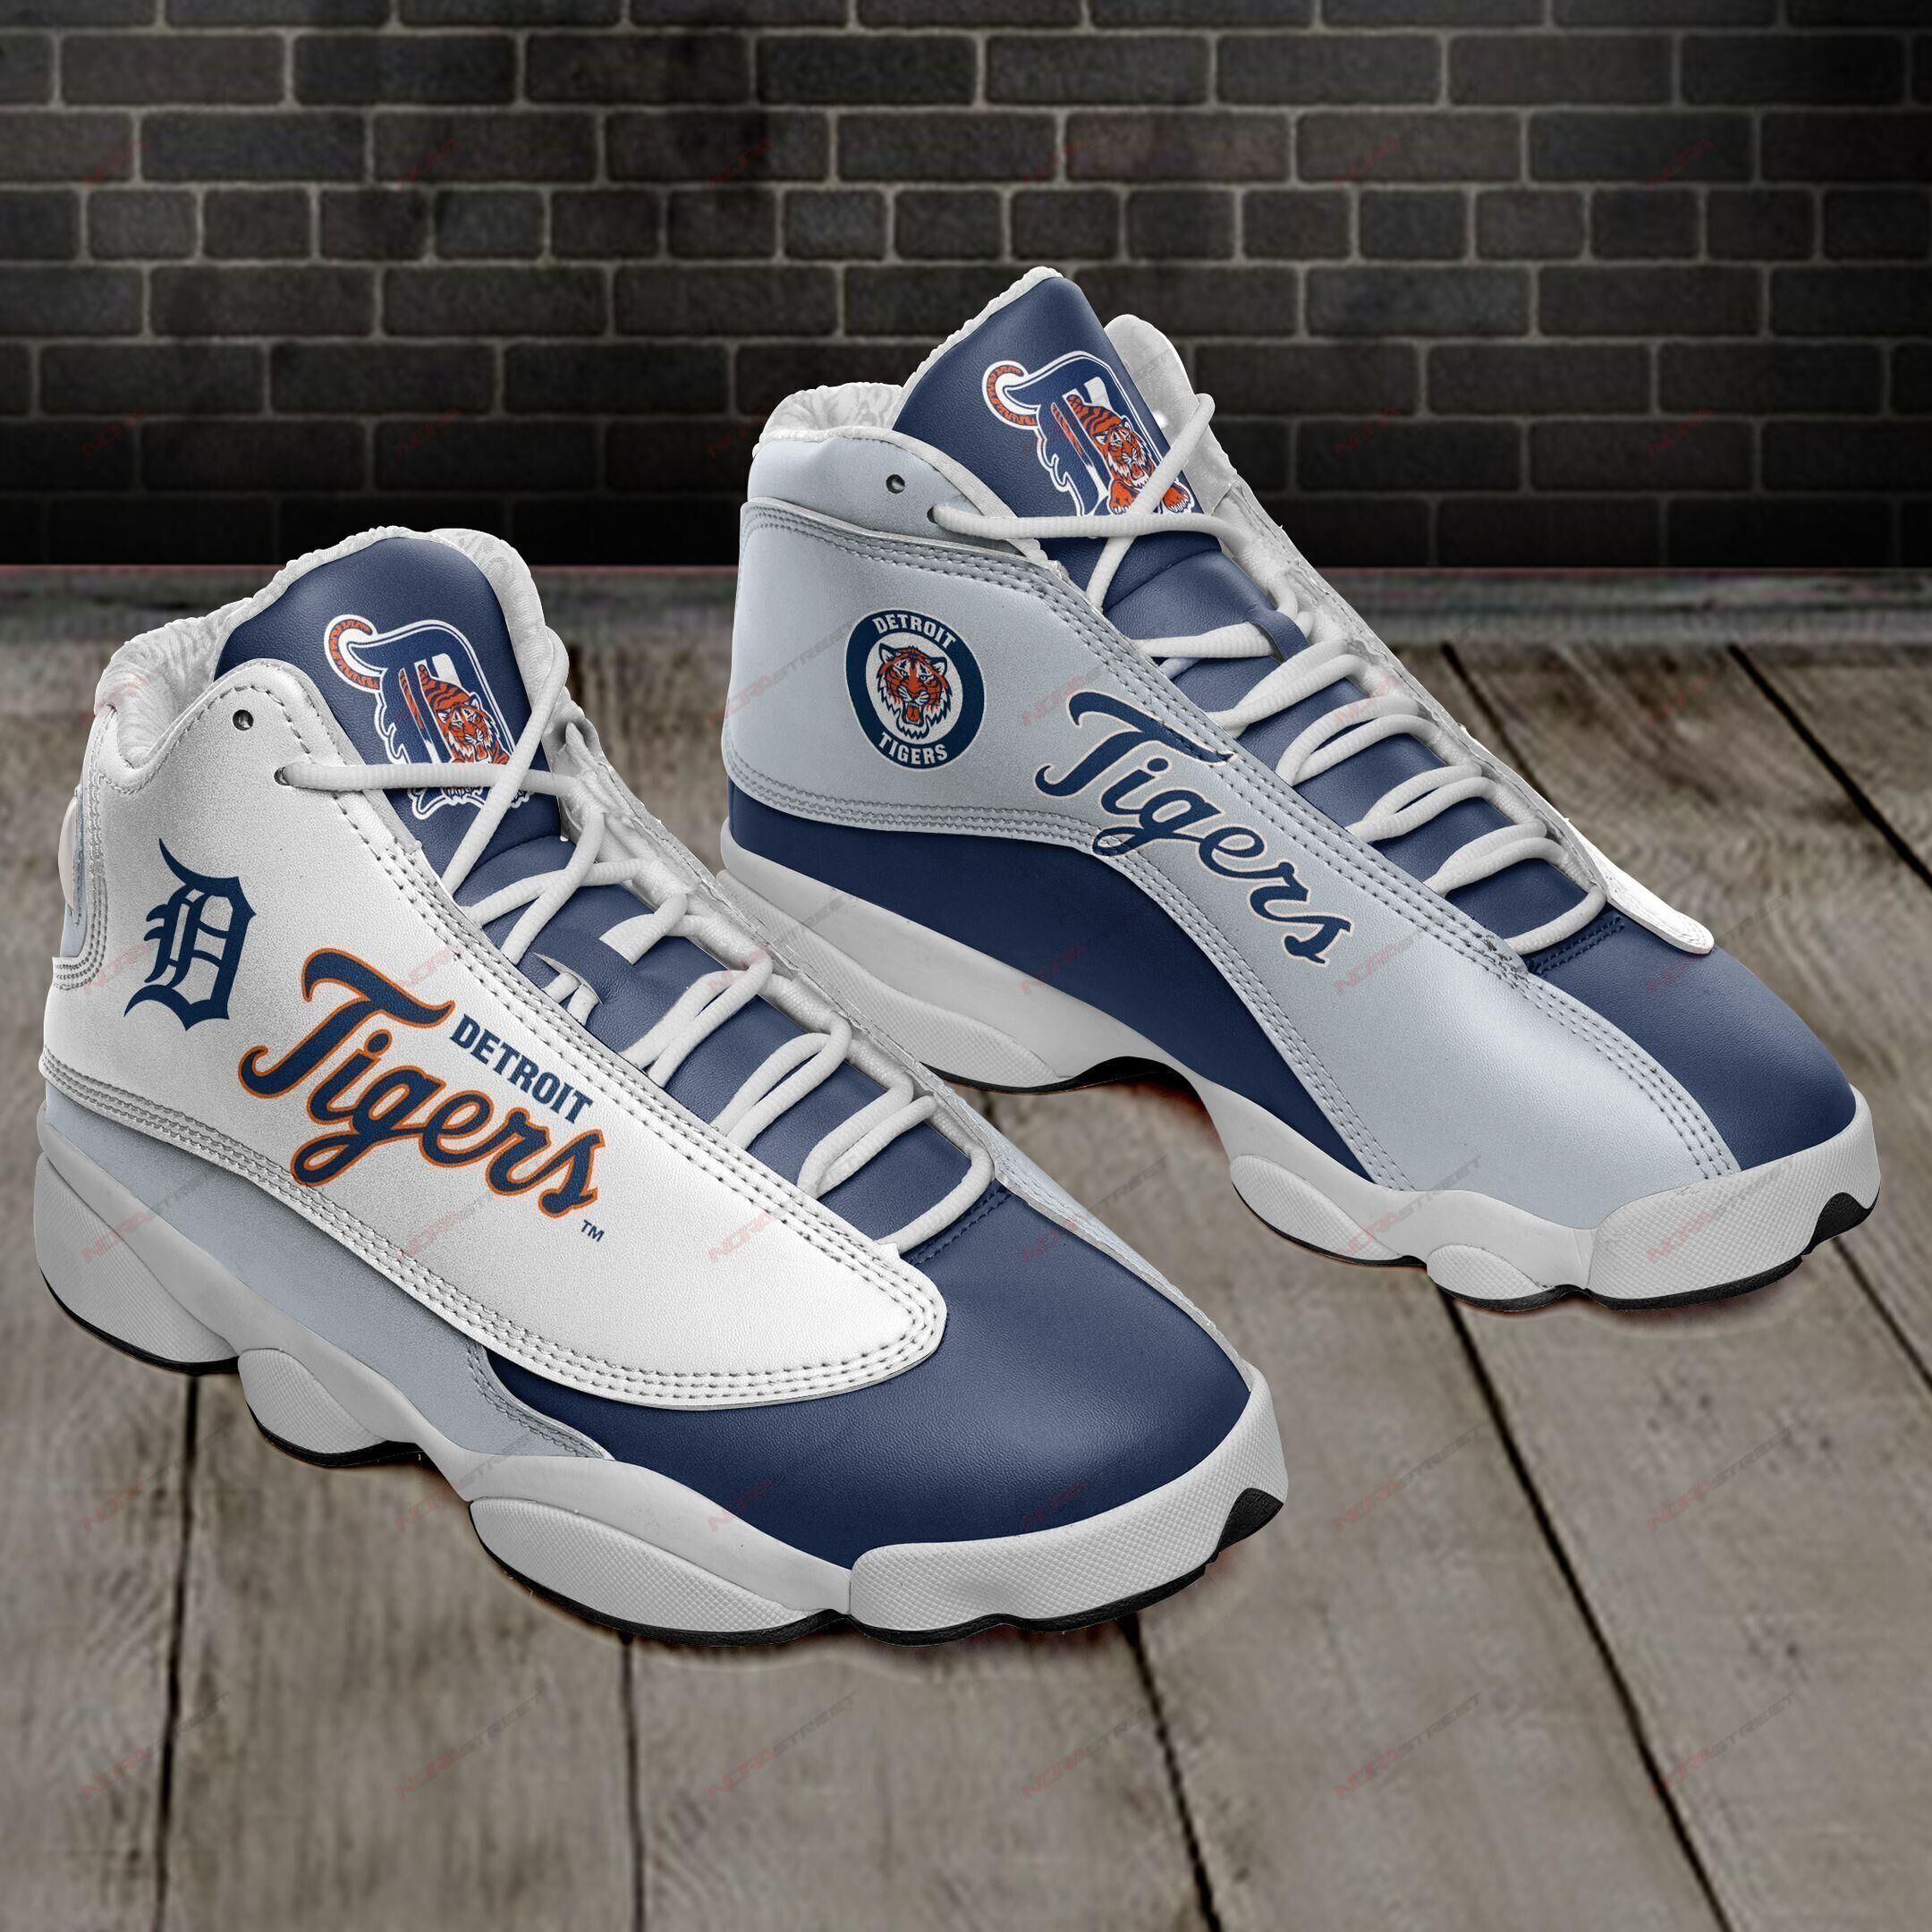 Men's Detroit Tigers Limited Edition JD13 Sneakers 001